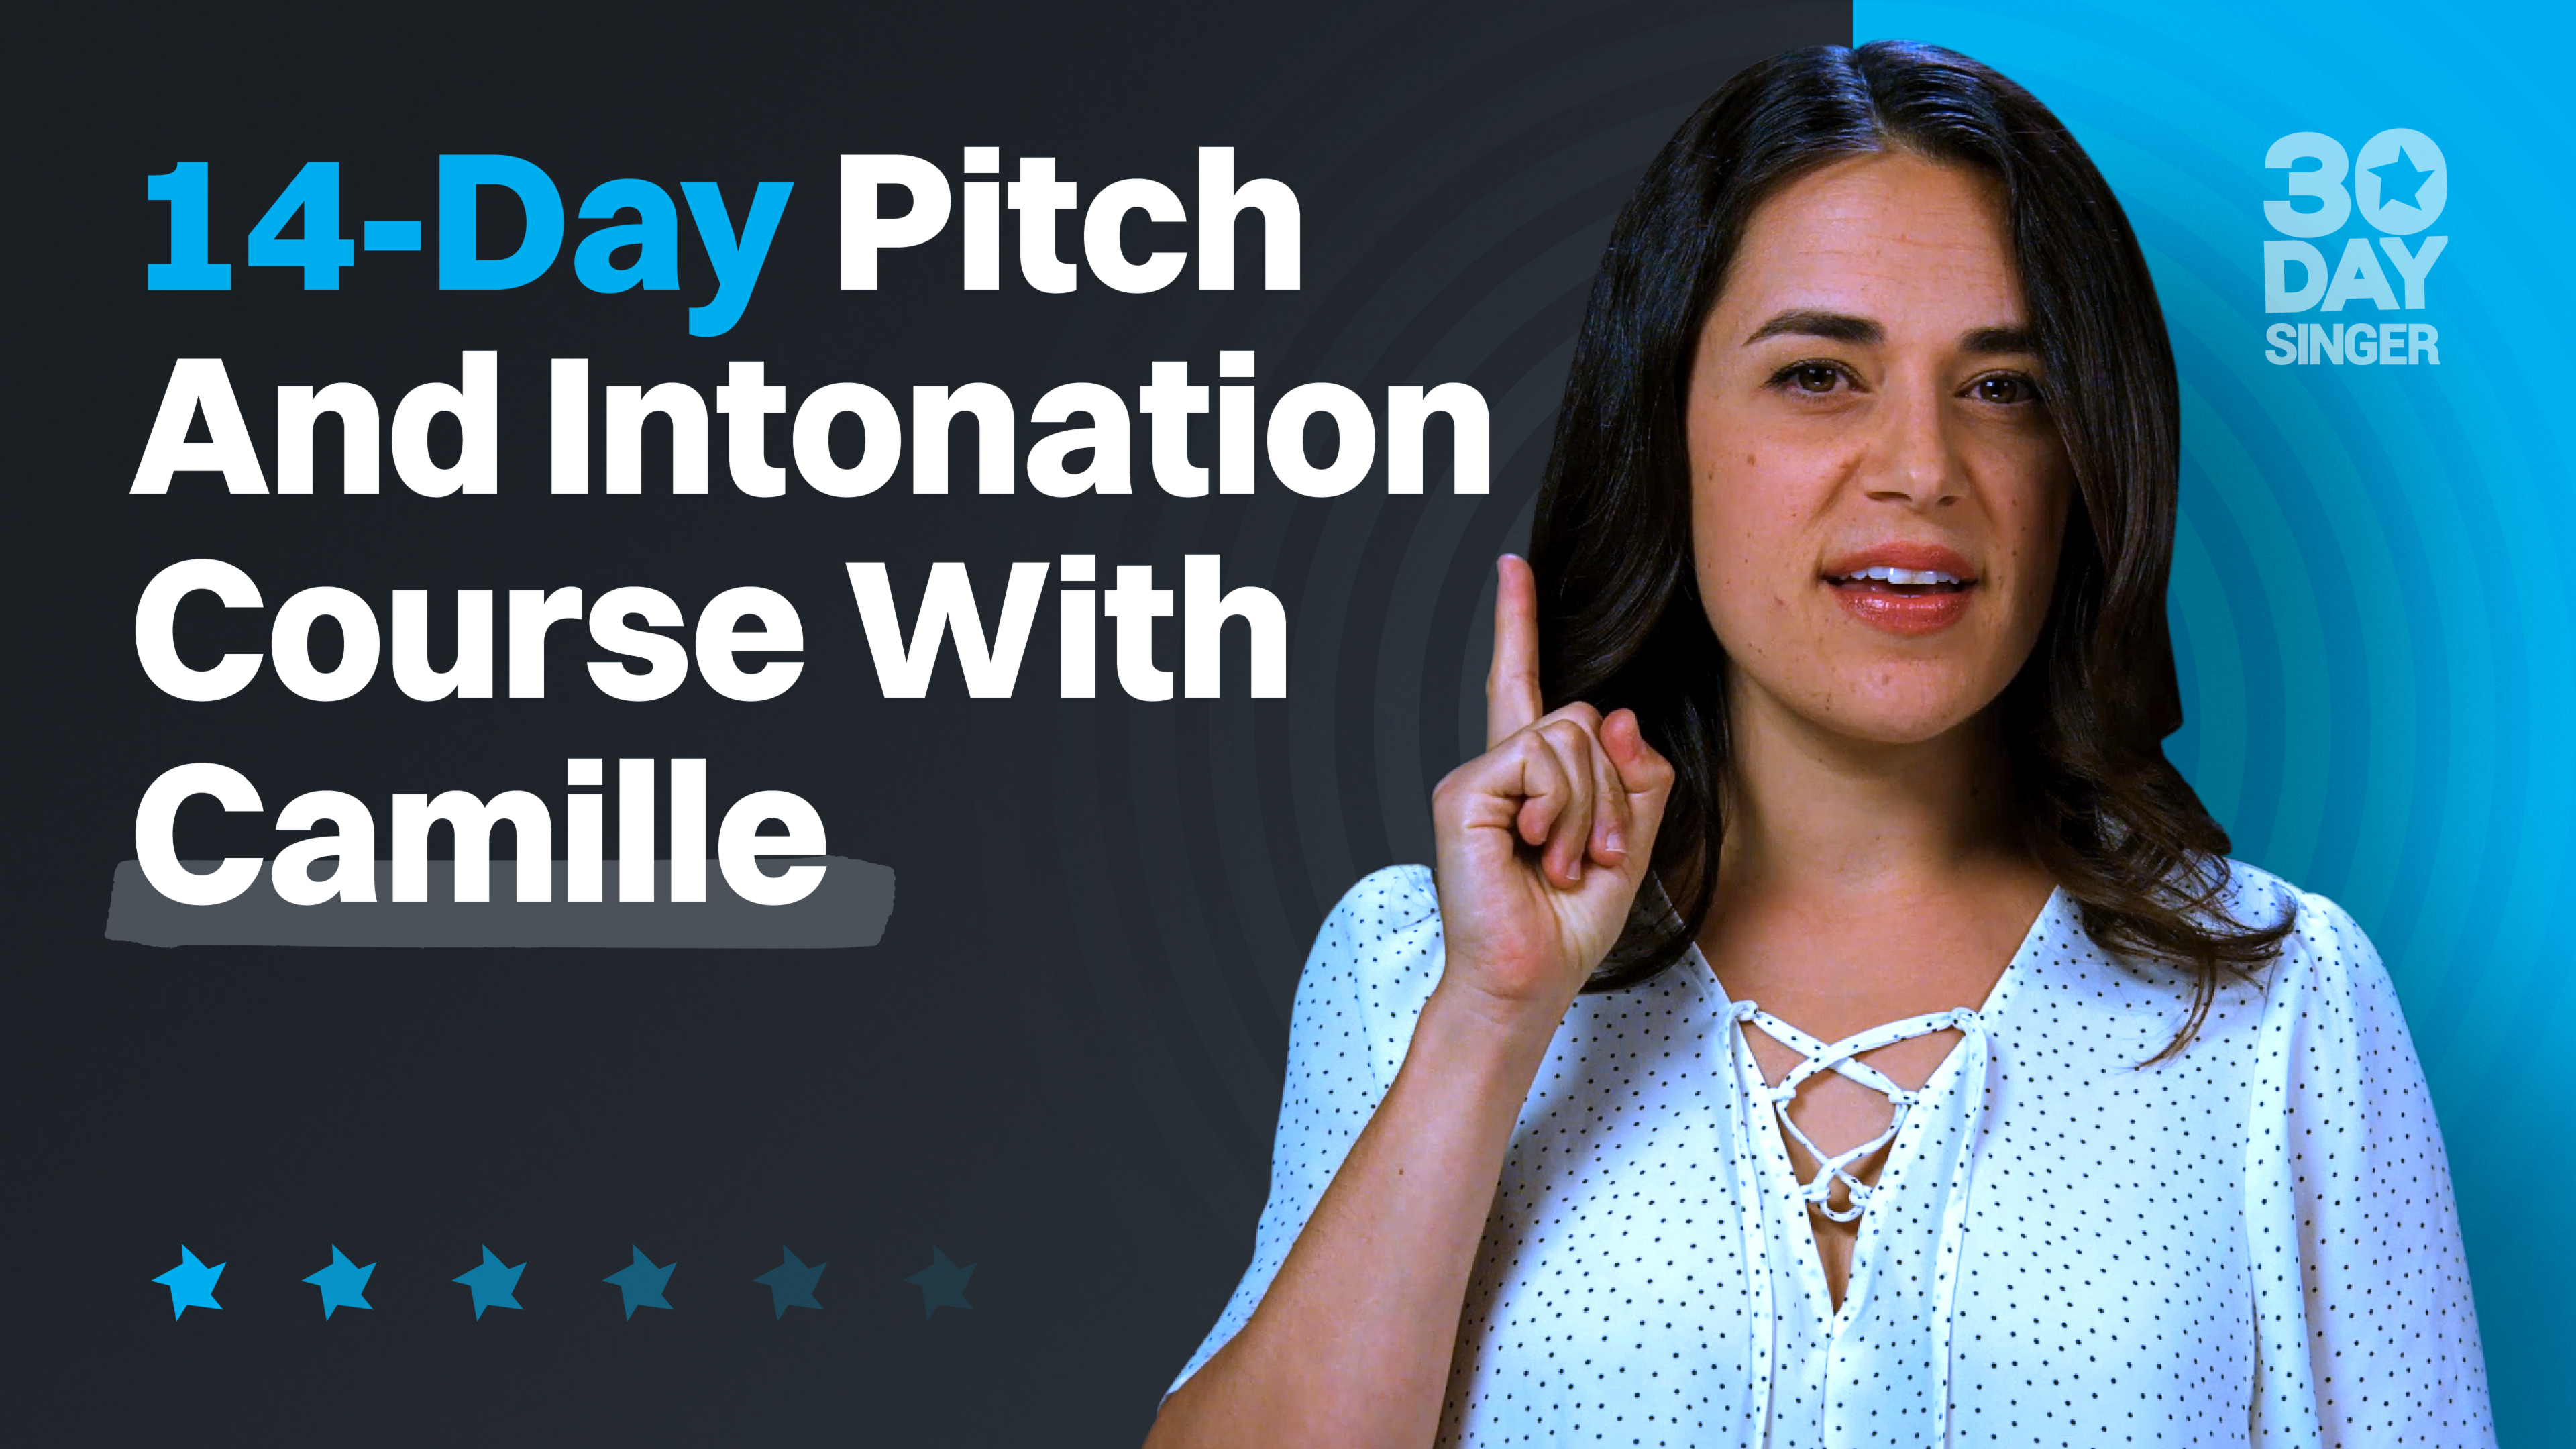 14-Day Pitch And Intonation Course With Camille